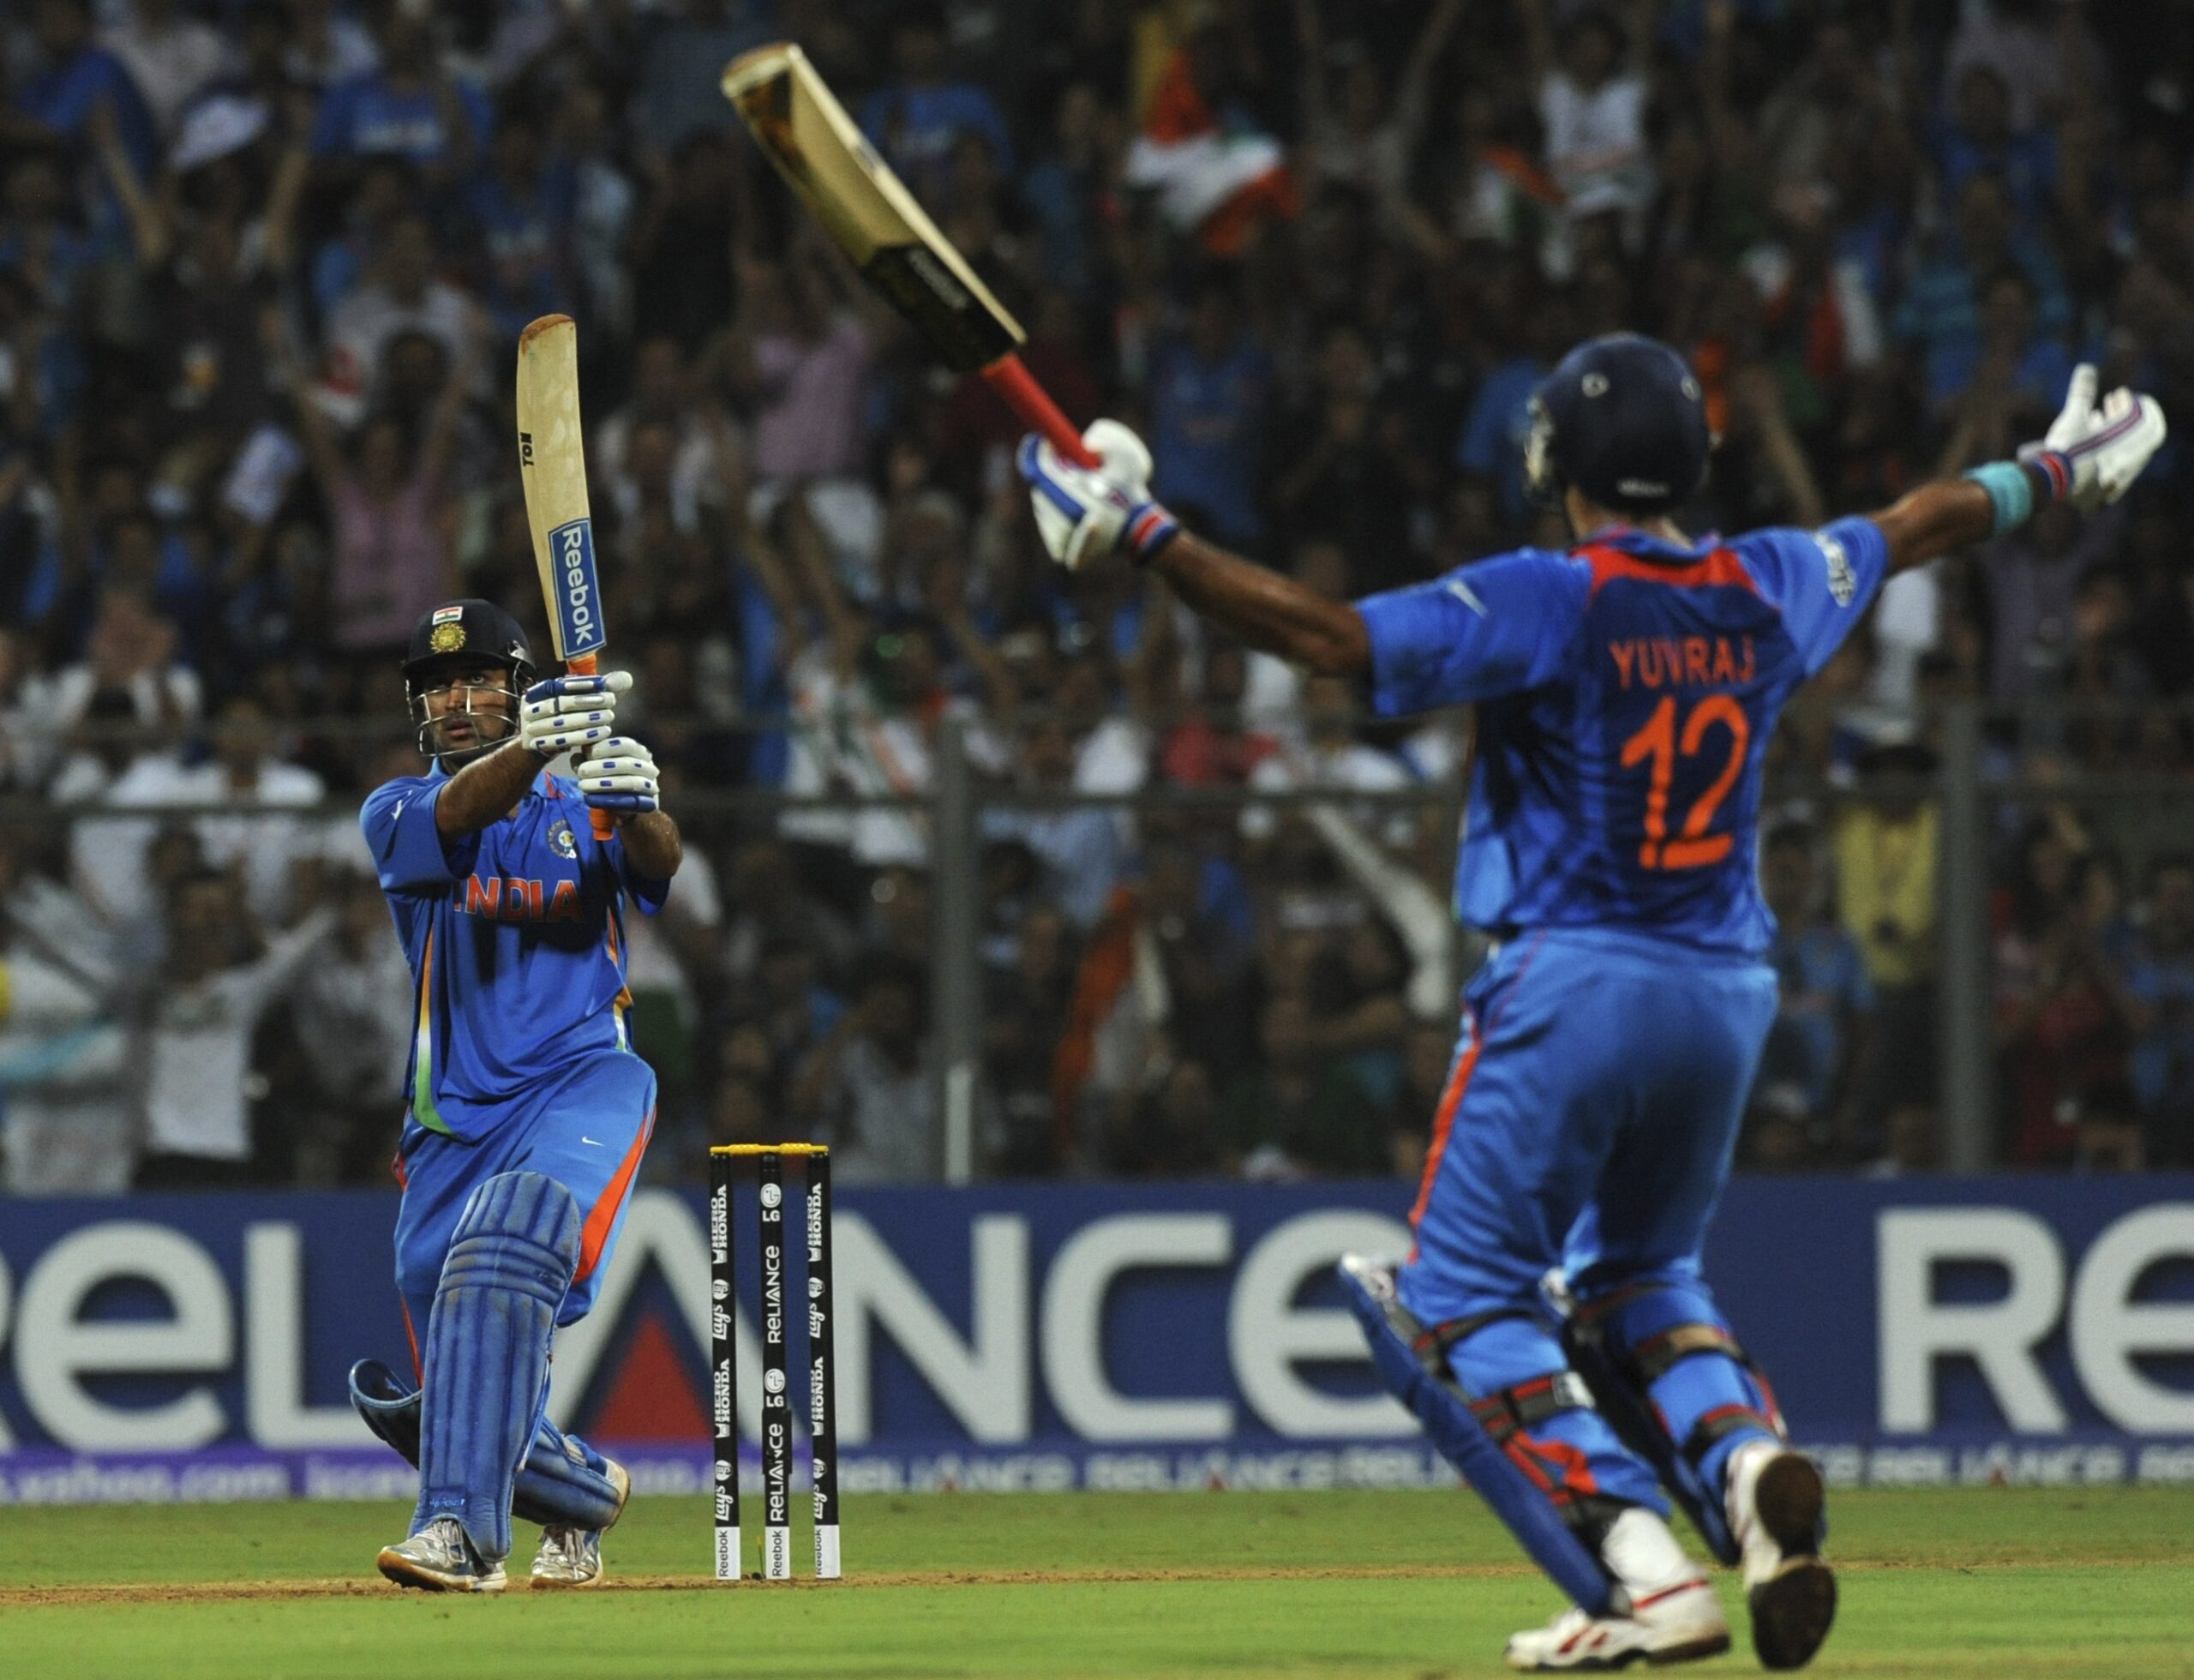 MS Dhoni winning six in the finals of 2011 WC